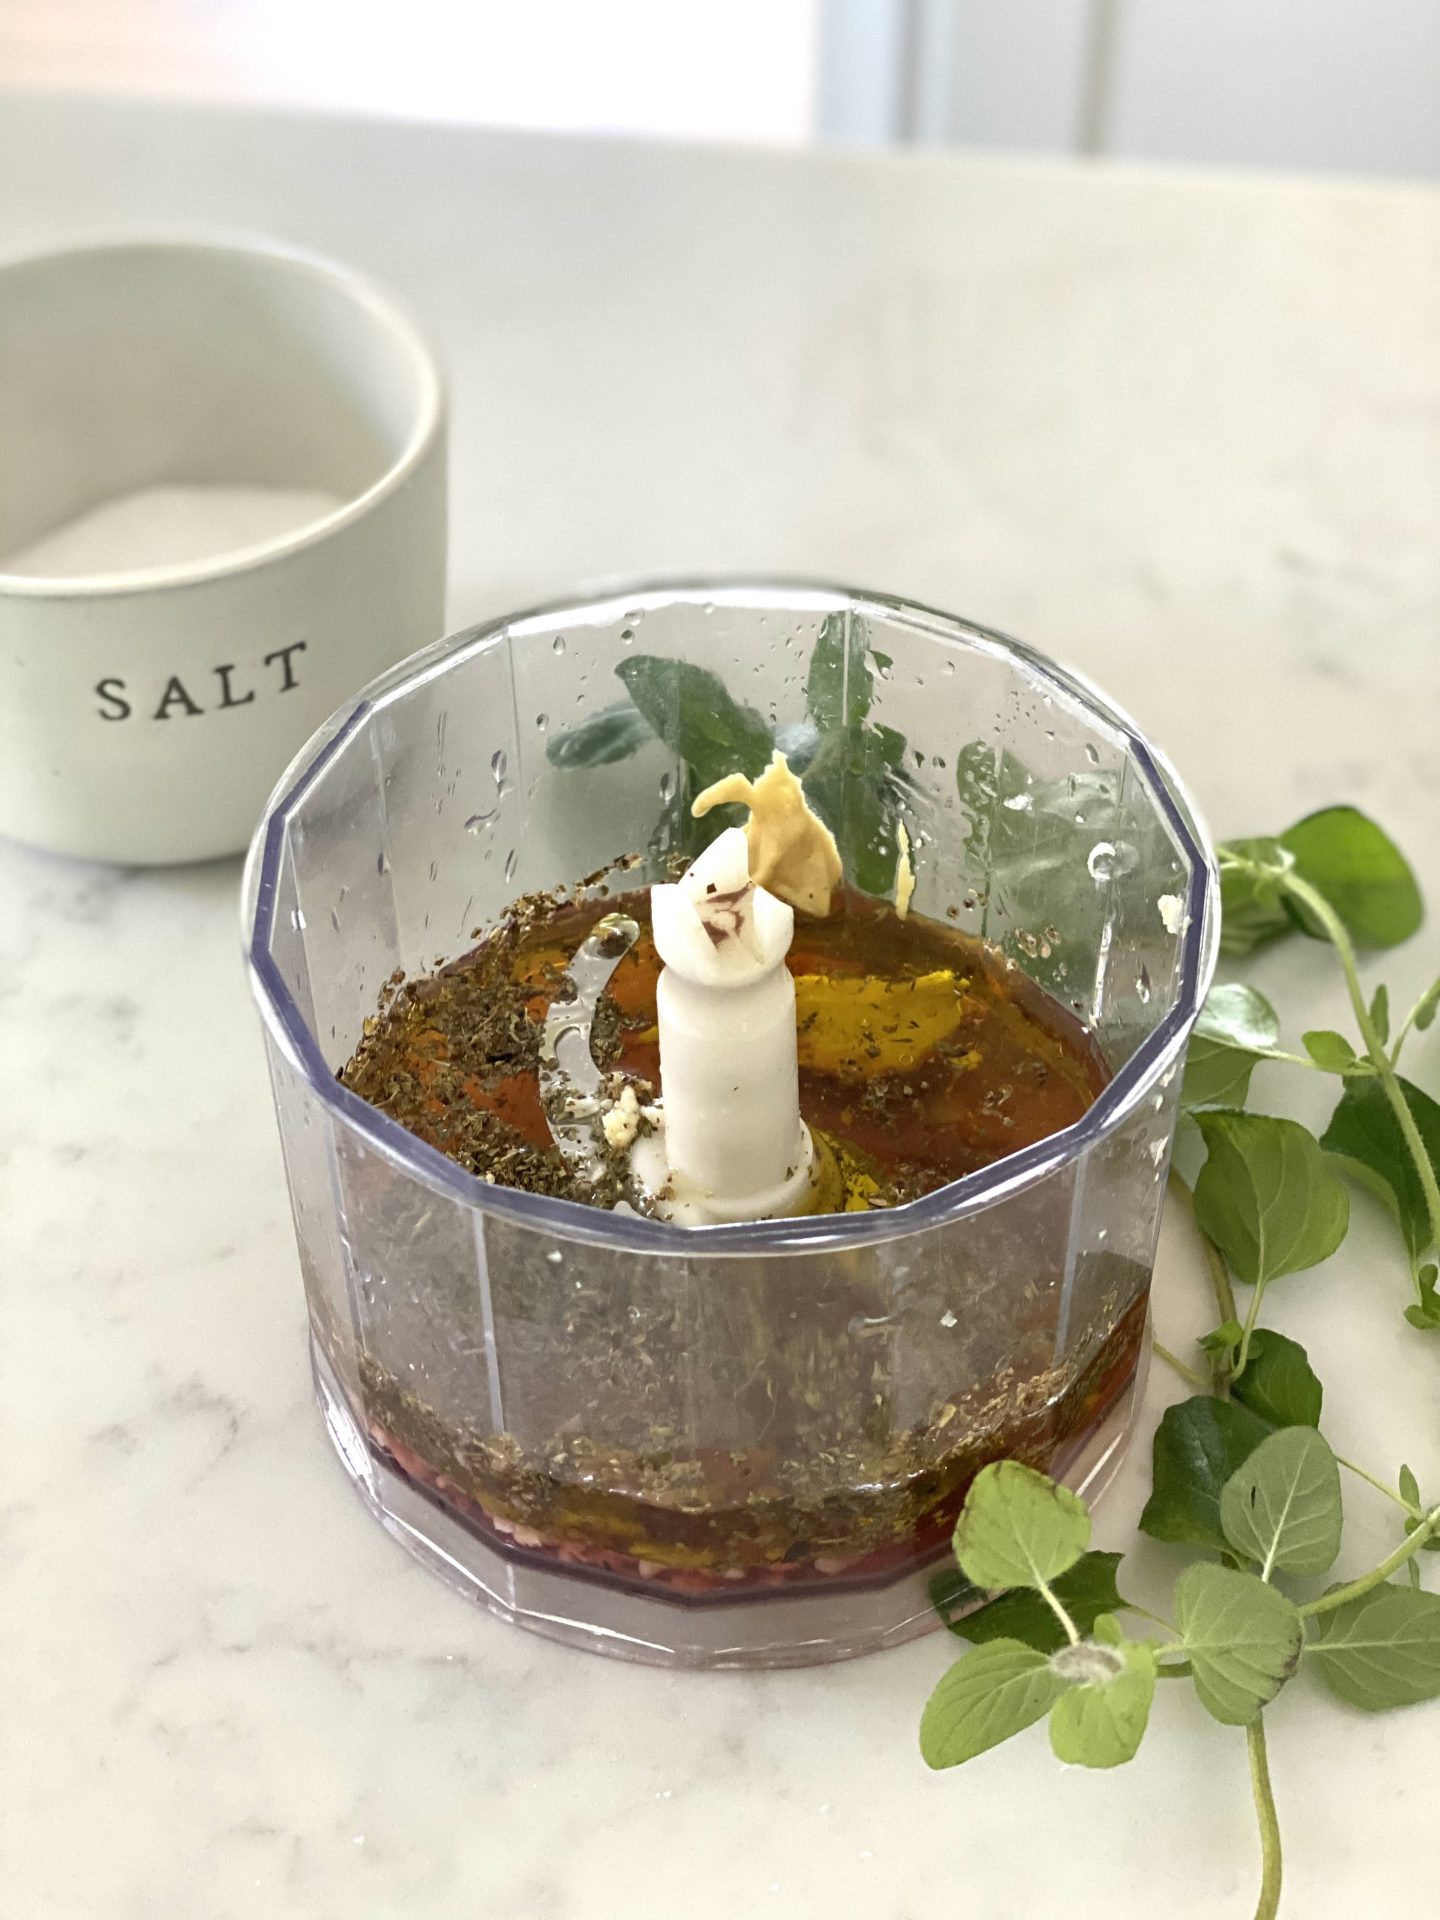 Lifestyle Blogger Chocolate and Lace shares her recipe for Lemon and Oregano Greek Dressing.